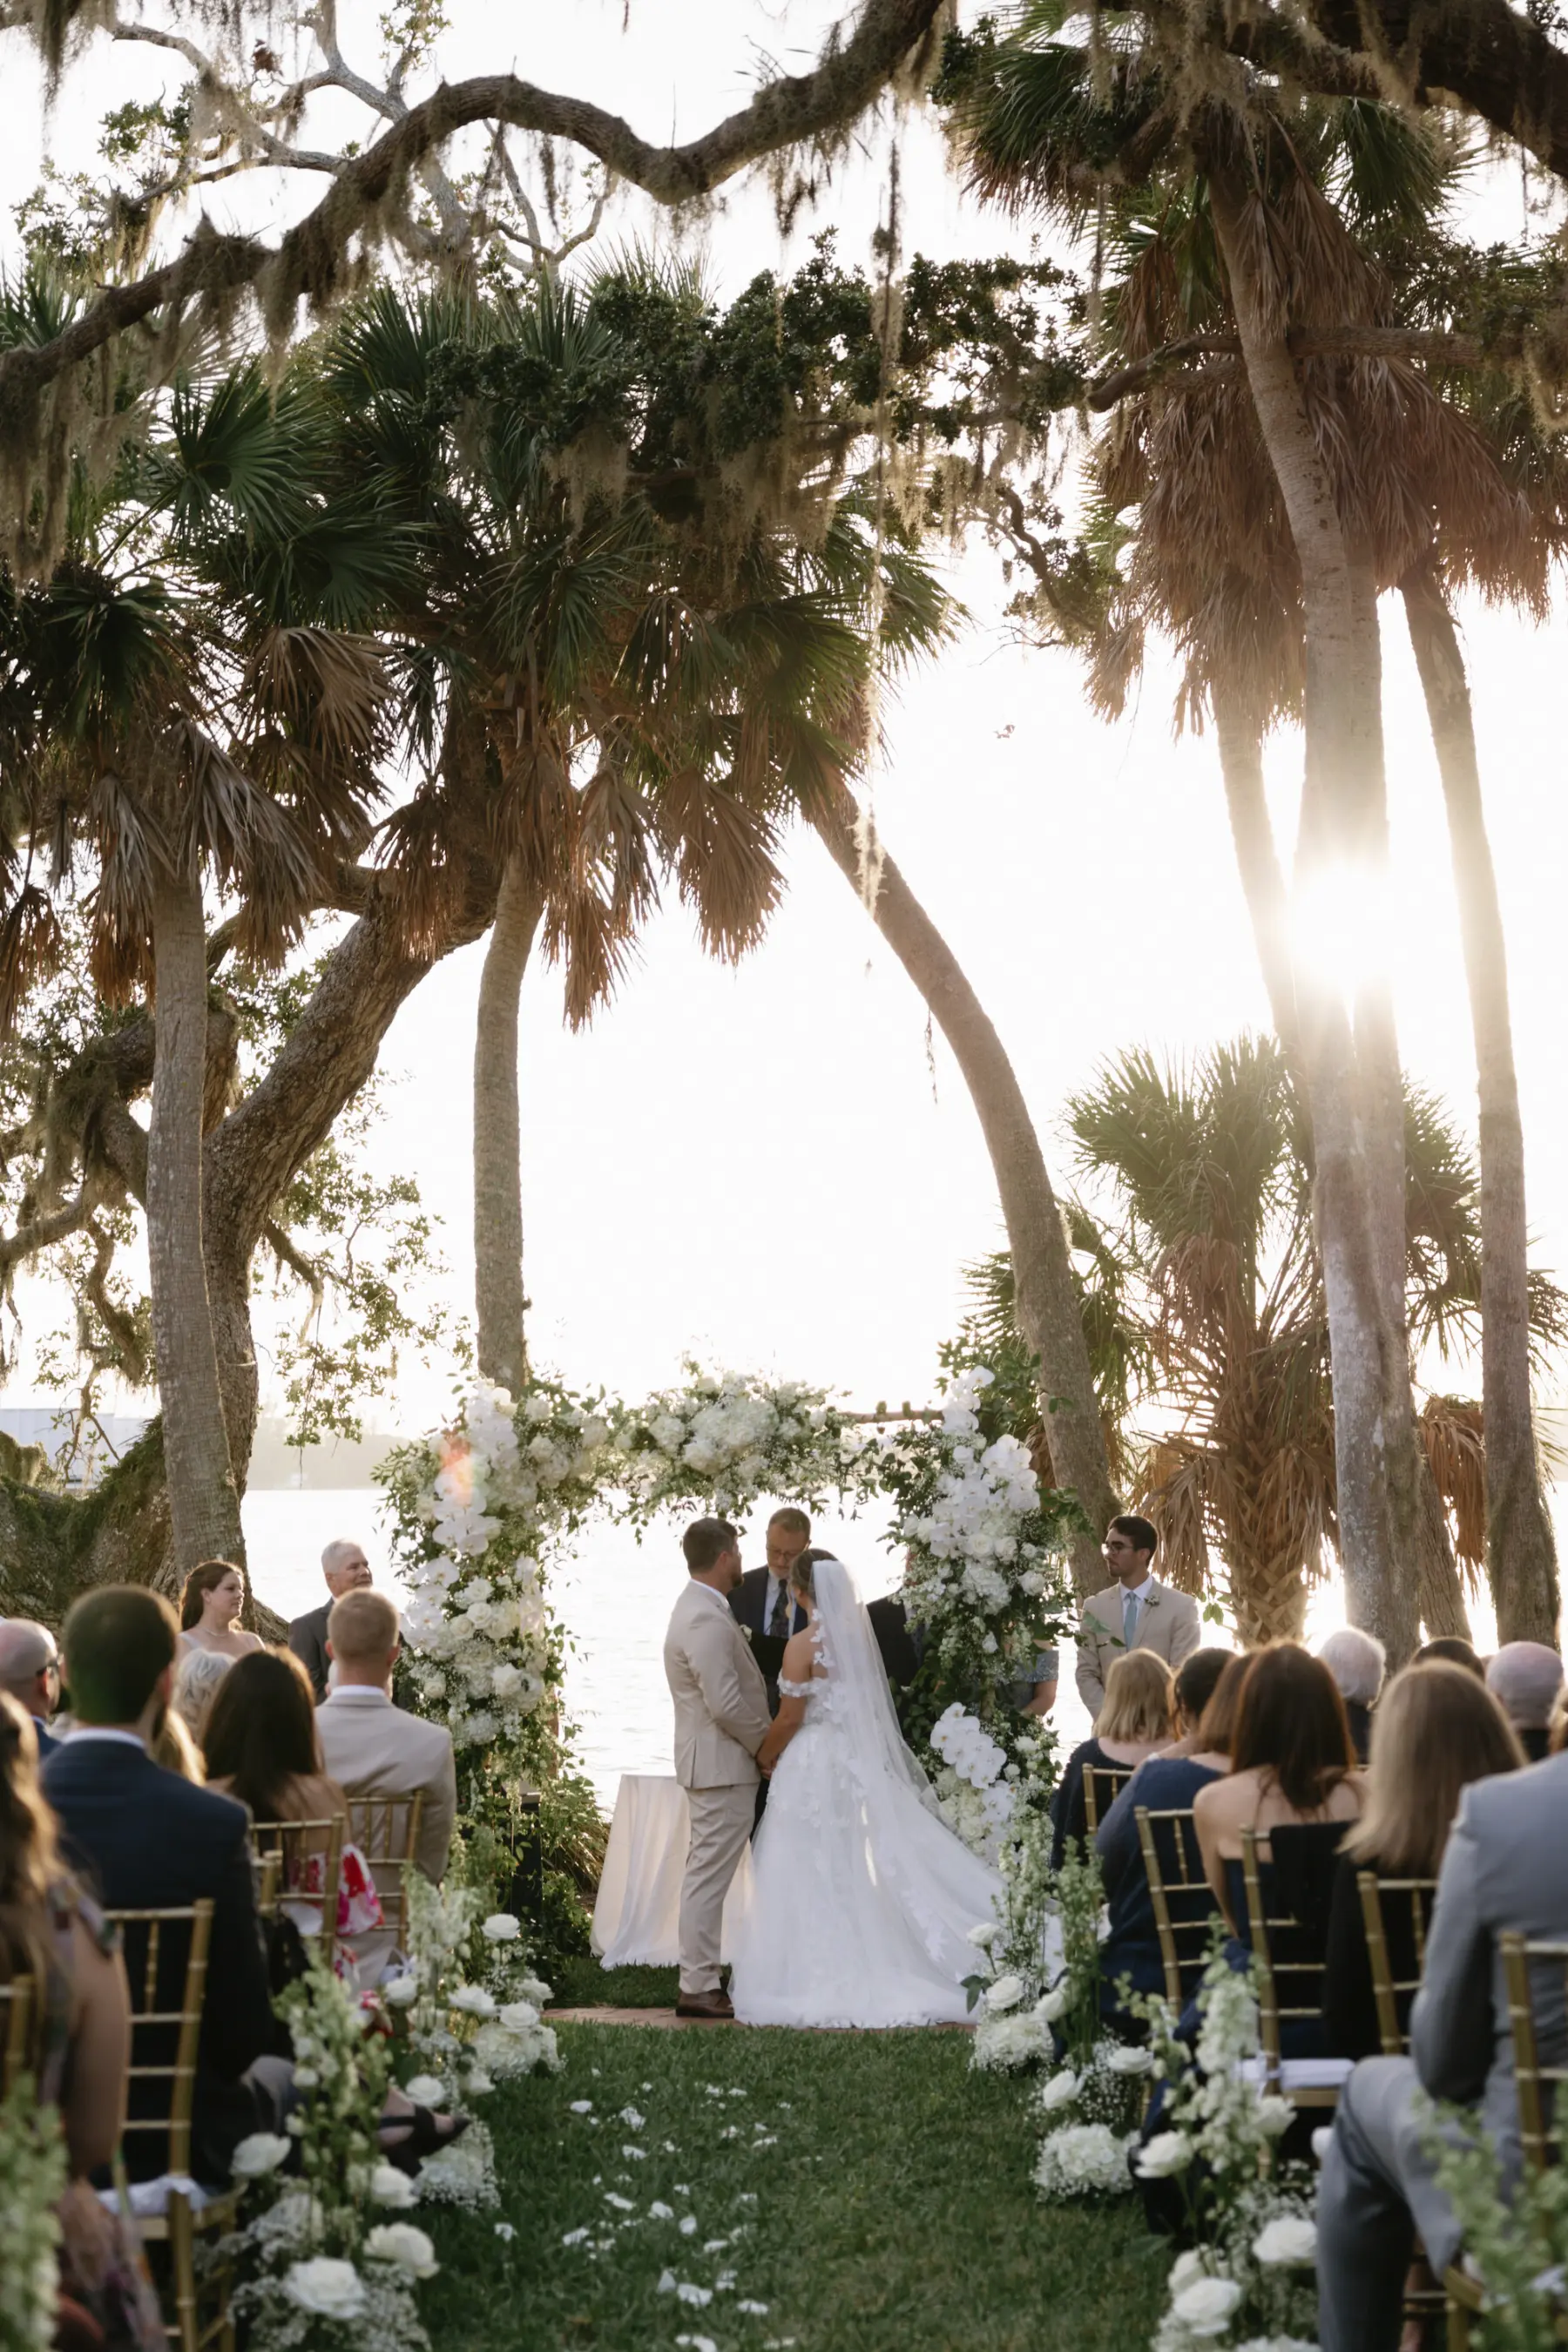 Bride and Groom Outdoor Sunset Oceanfront Wedding Ceremony Ideas | Classic White Wedding Ceremony Arch with White Roses, Orchids, Baby's Breath, Hydrangeas, and Greenery Decor Inspiration